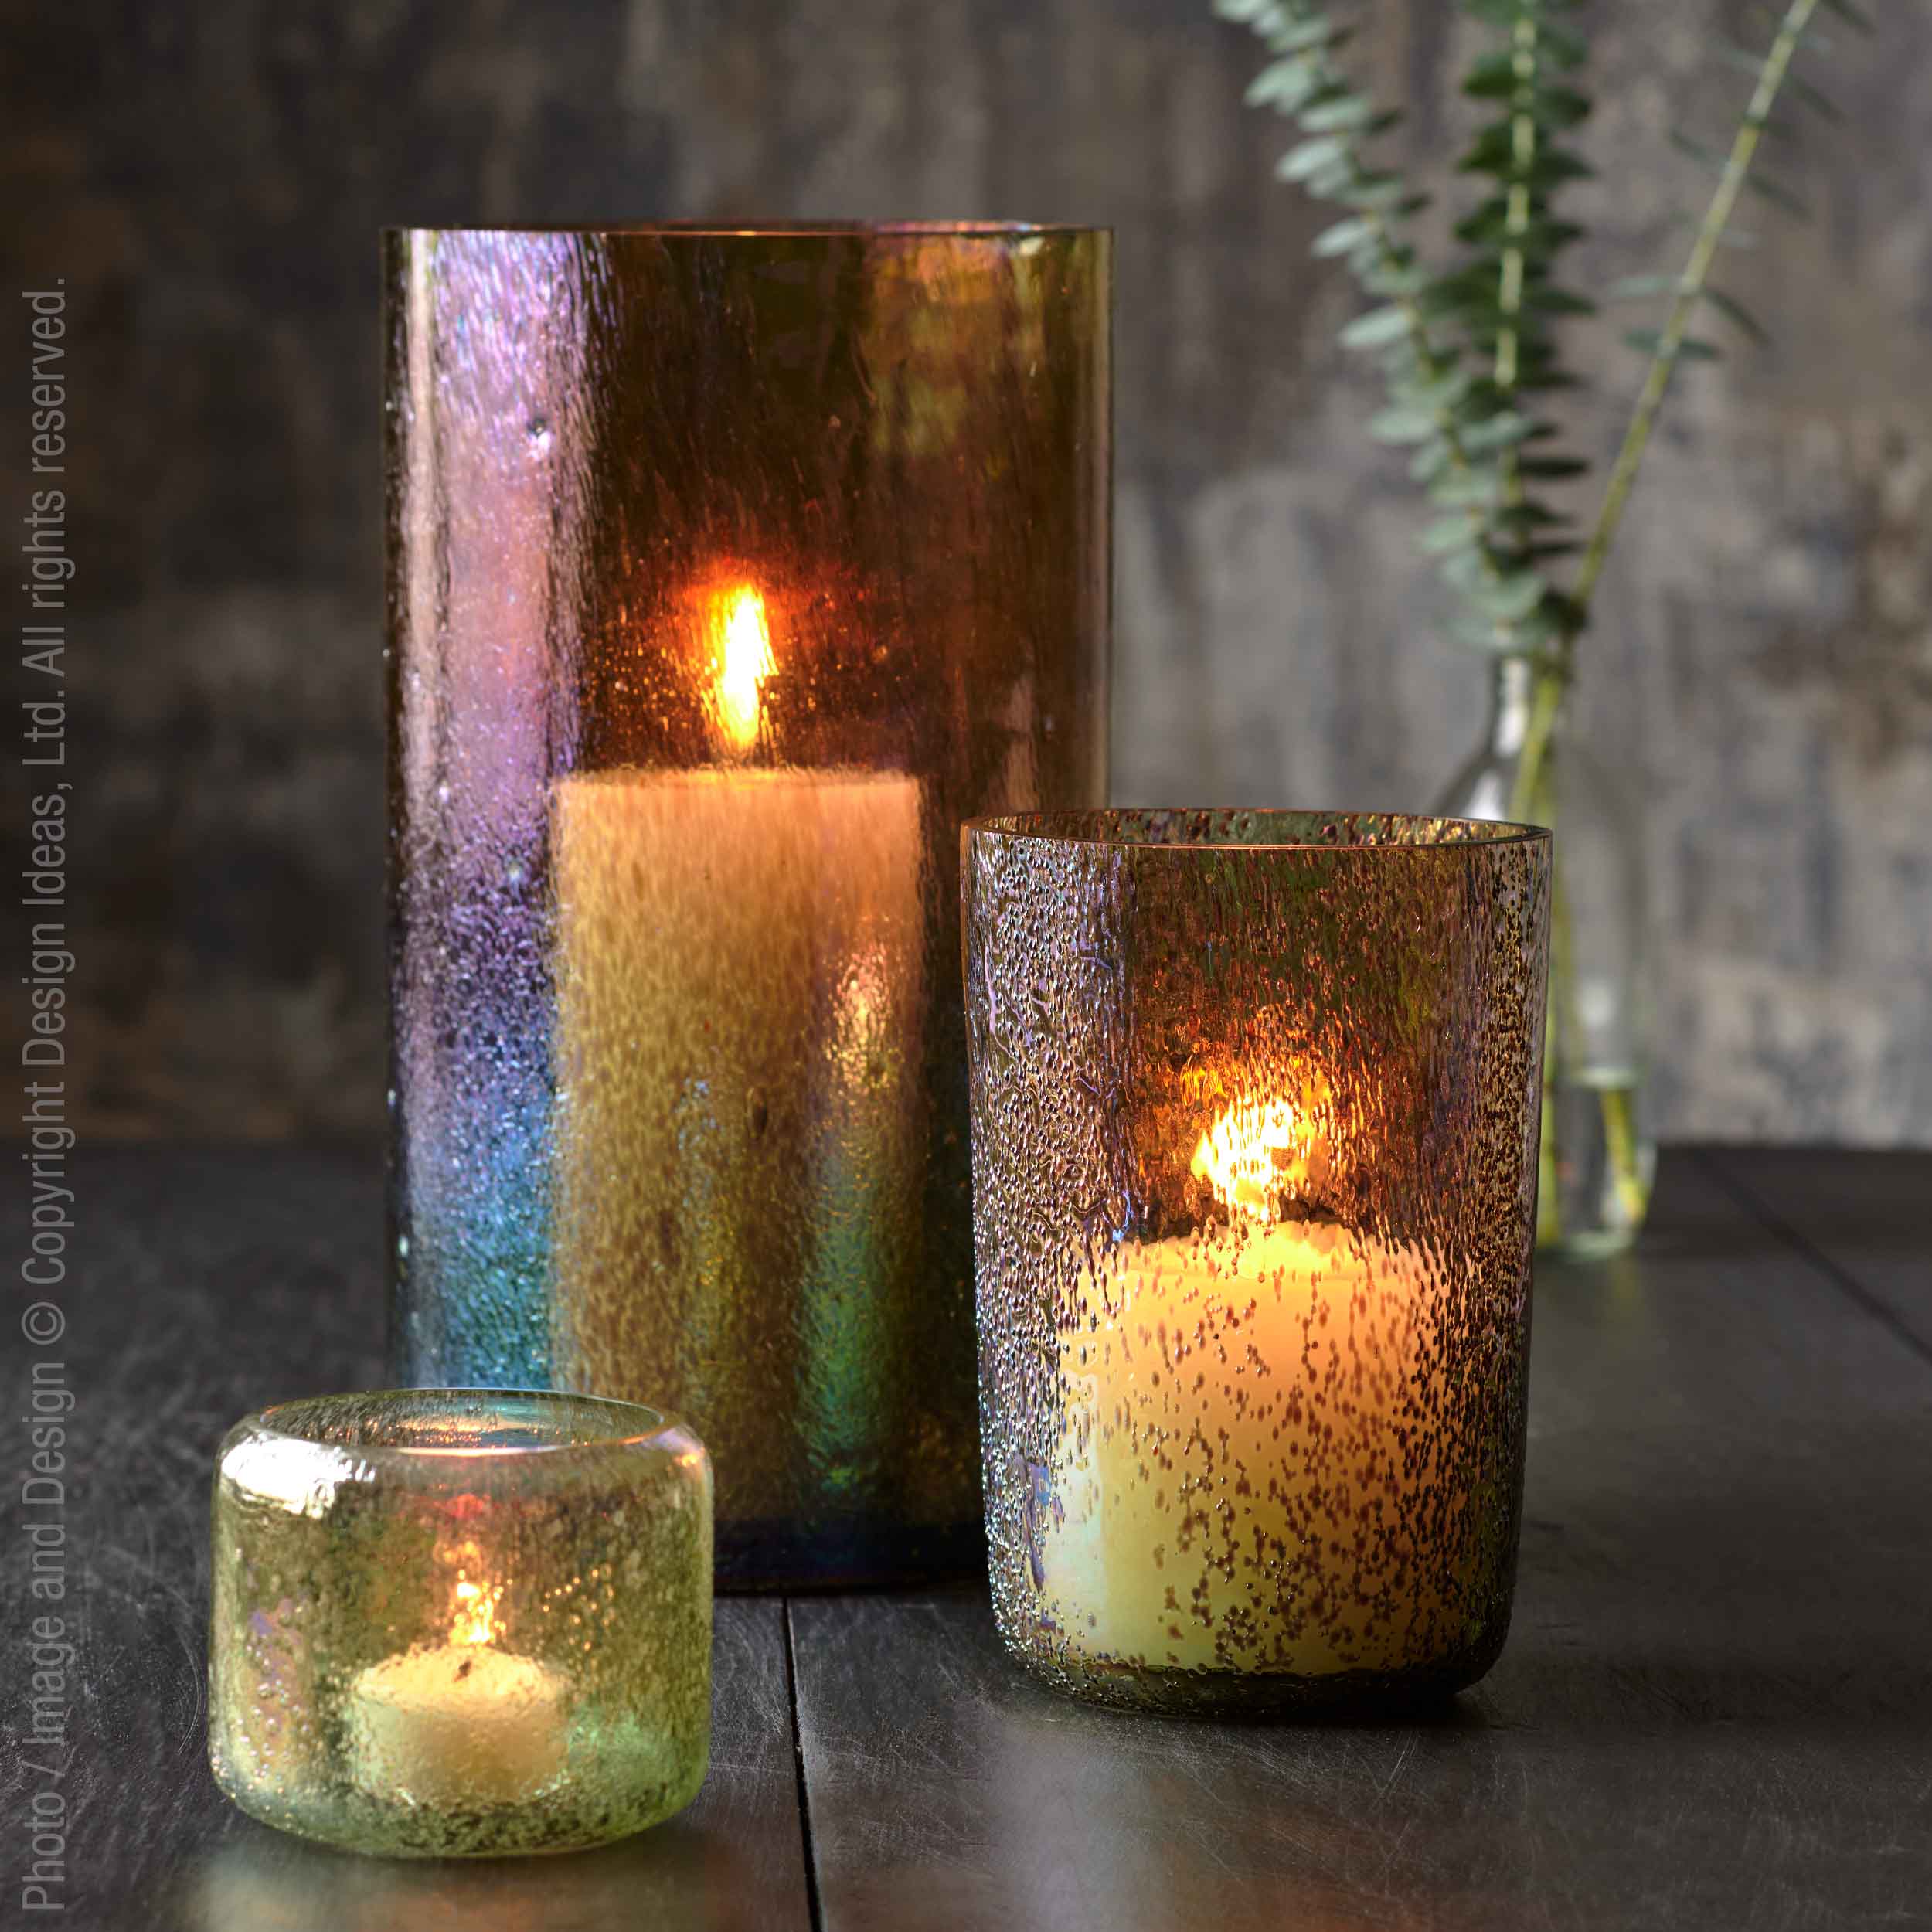 Hubbard™ hurricane (10in) - Golden | Image 2 | Premium Candleholder from the Hubbard collection | made with 100% Glass for long lasting use | texxture